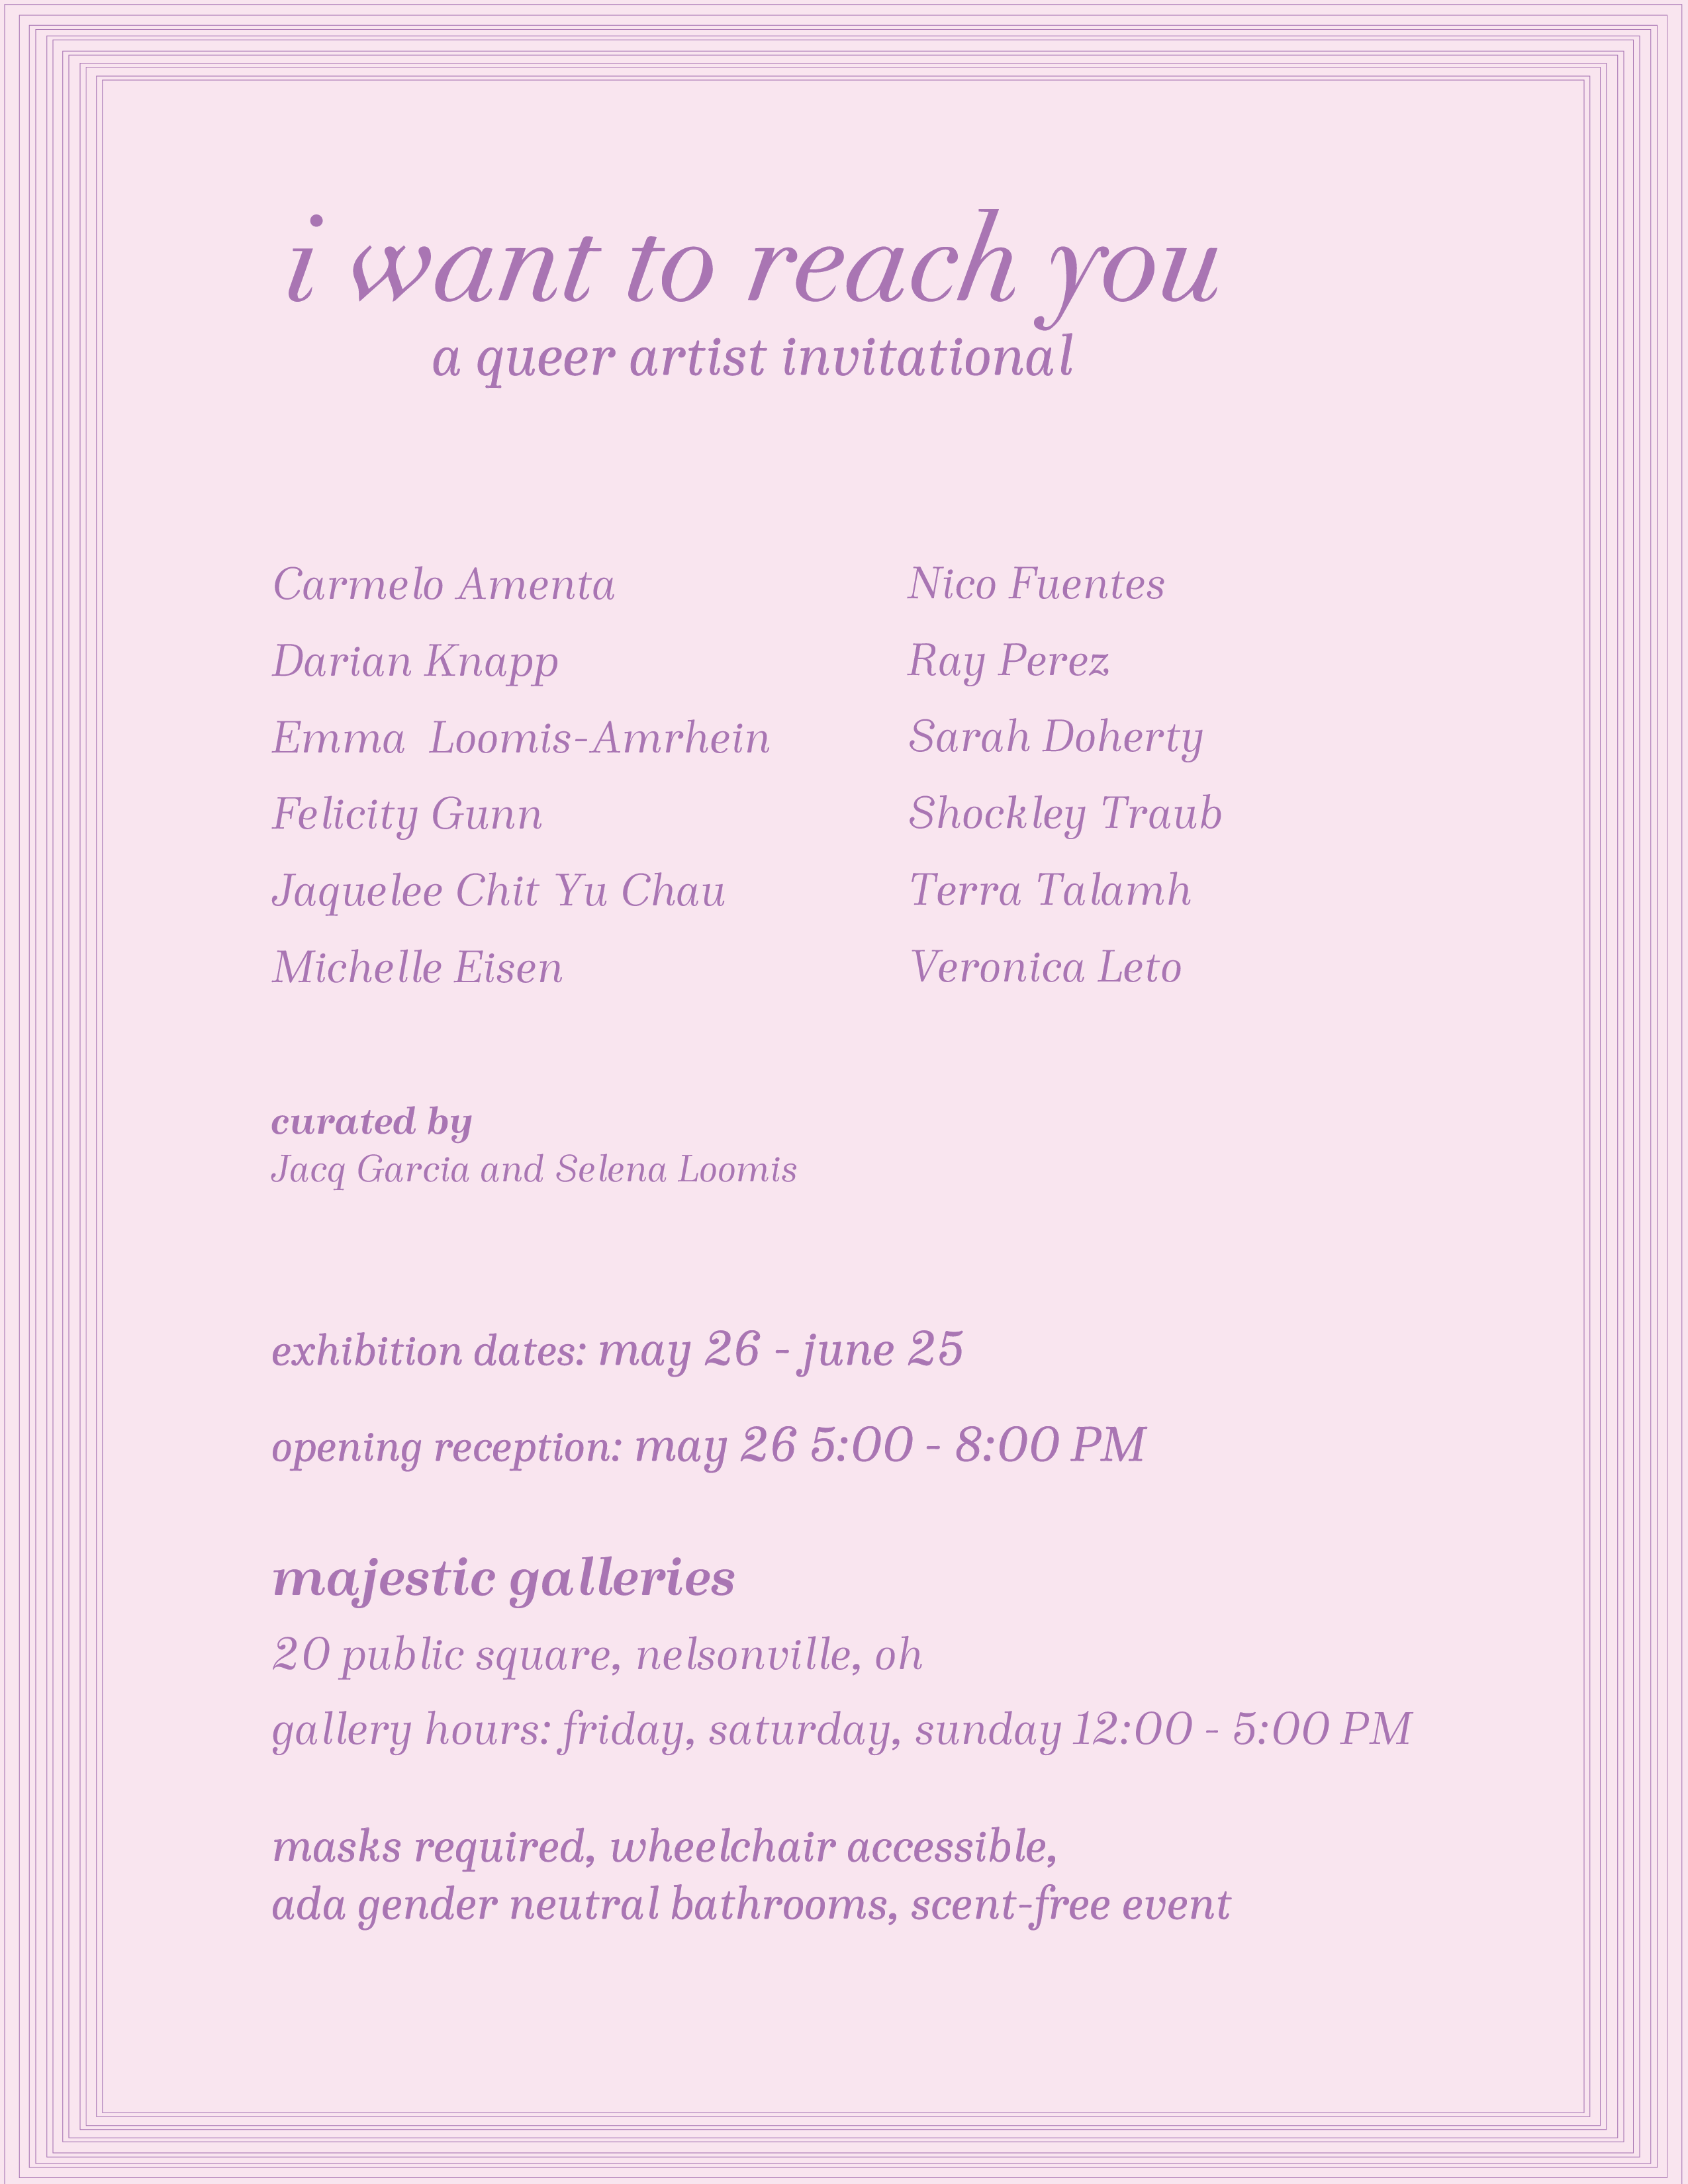 A flyer for the 'I Want to Reach You' exhibition